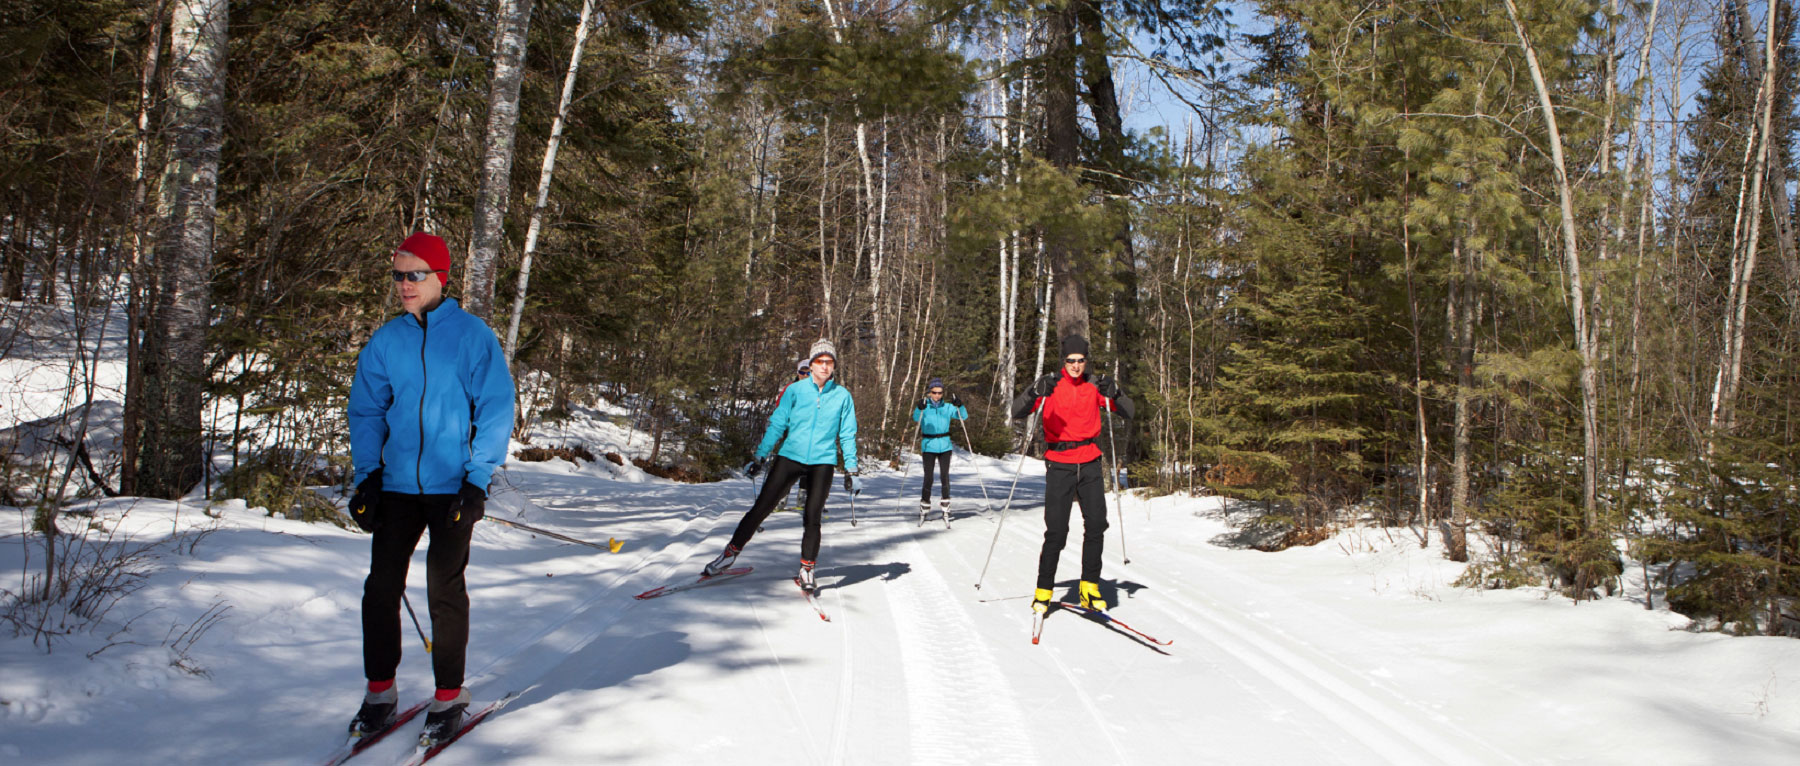 Cross Country Skiing in Northern Maine - Photo Credit Destination Moosehead Lake